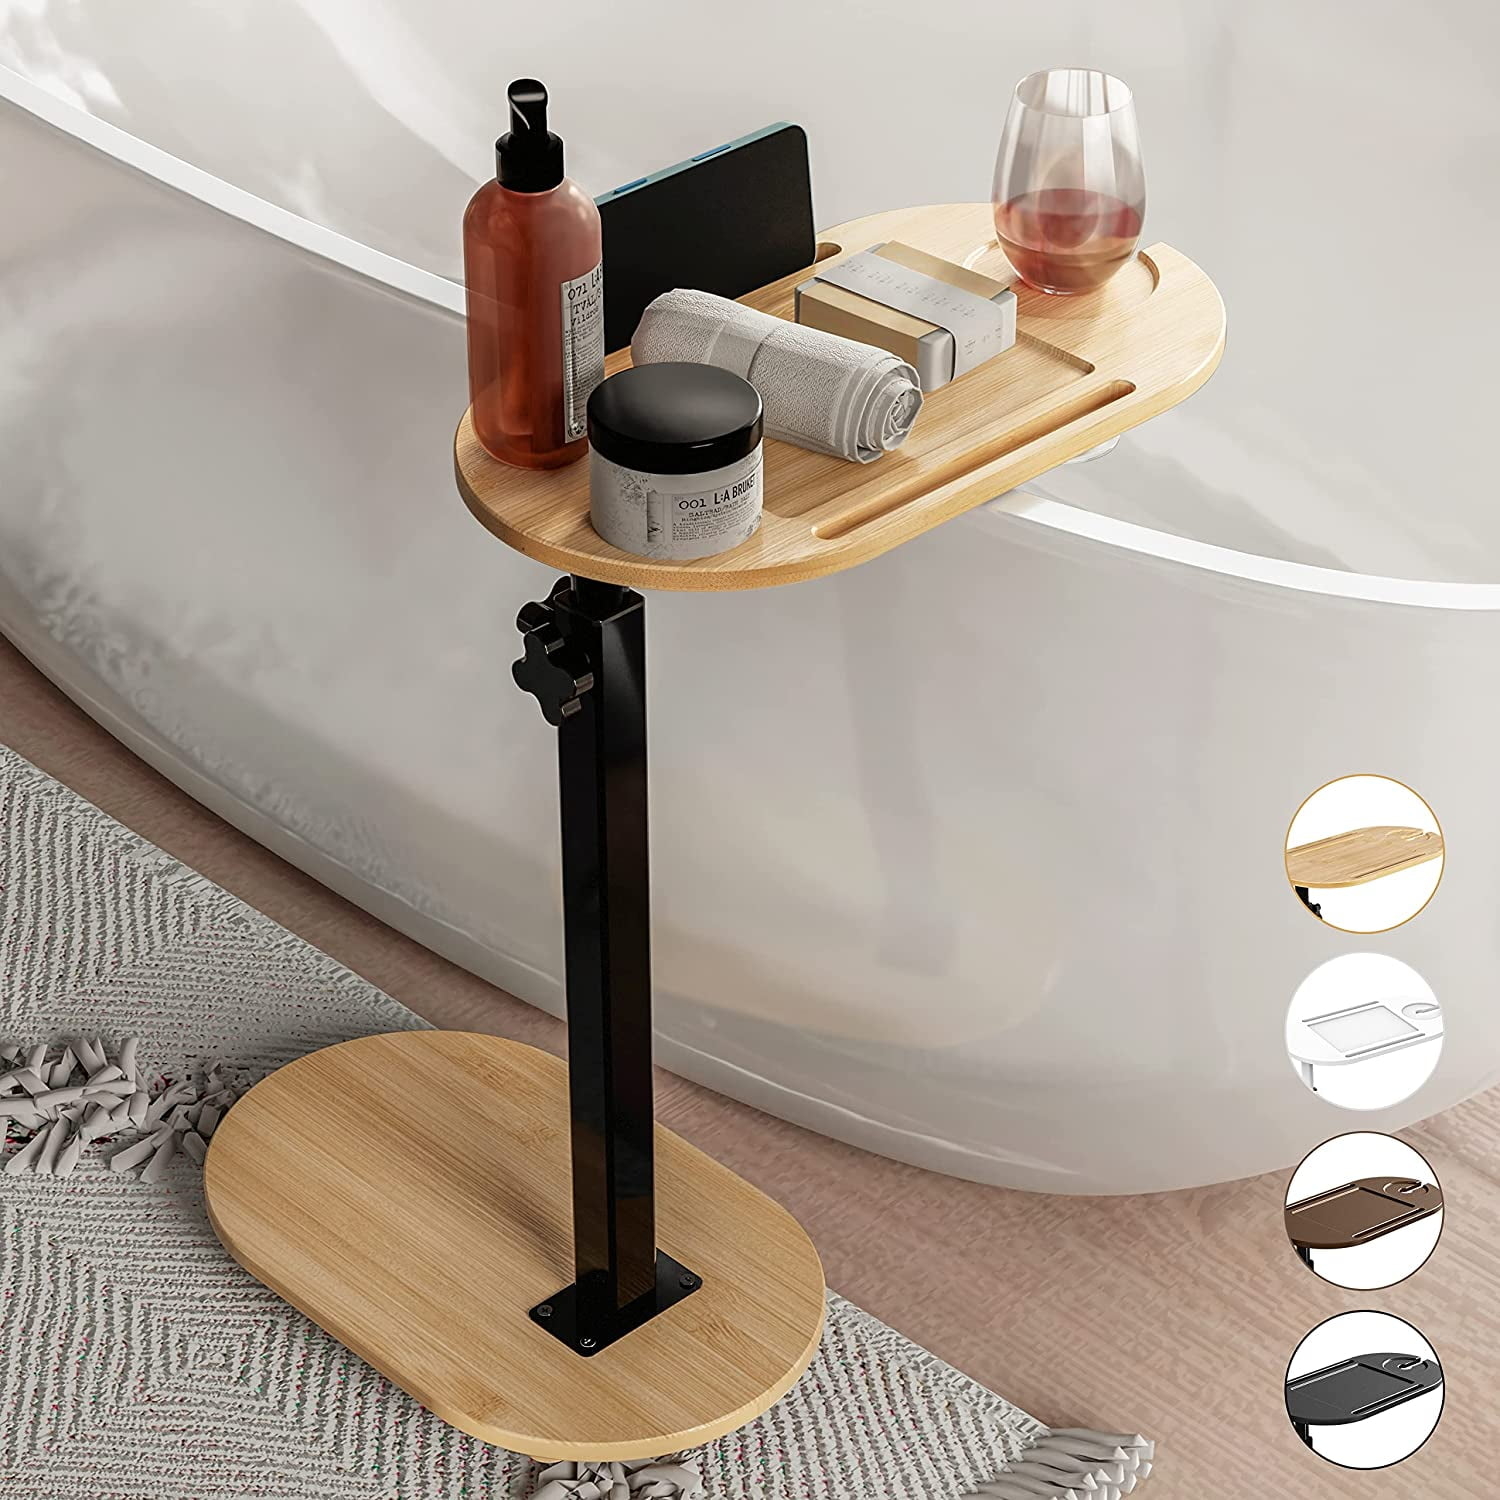 a swivel table next to a bathtub holding objects